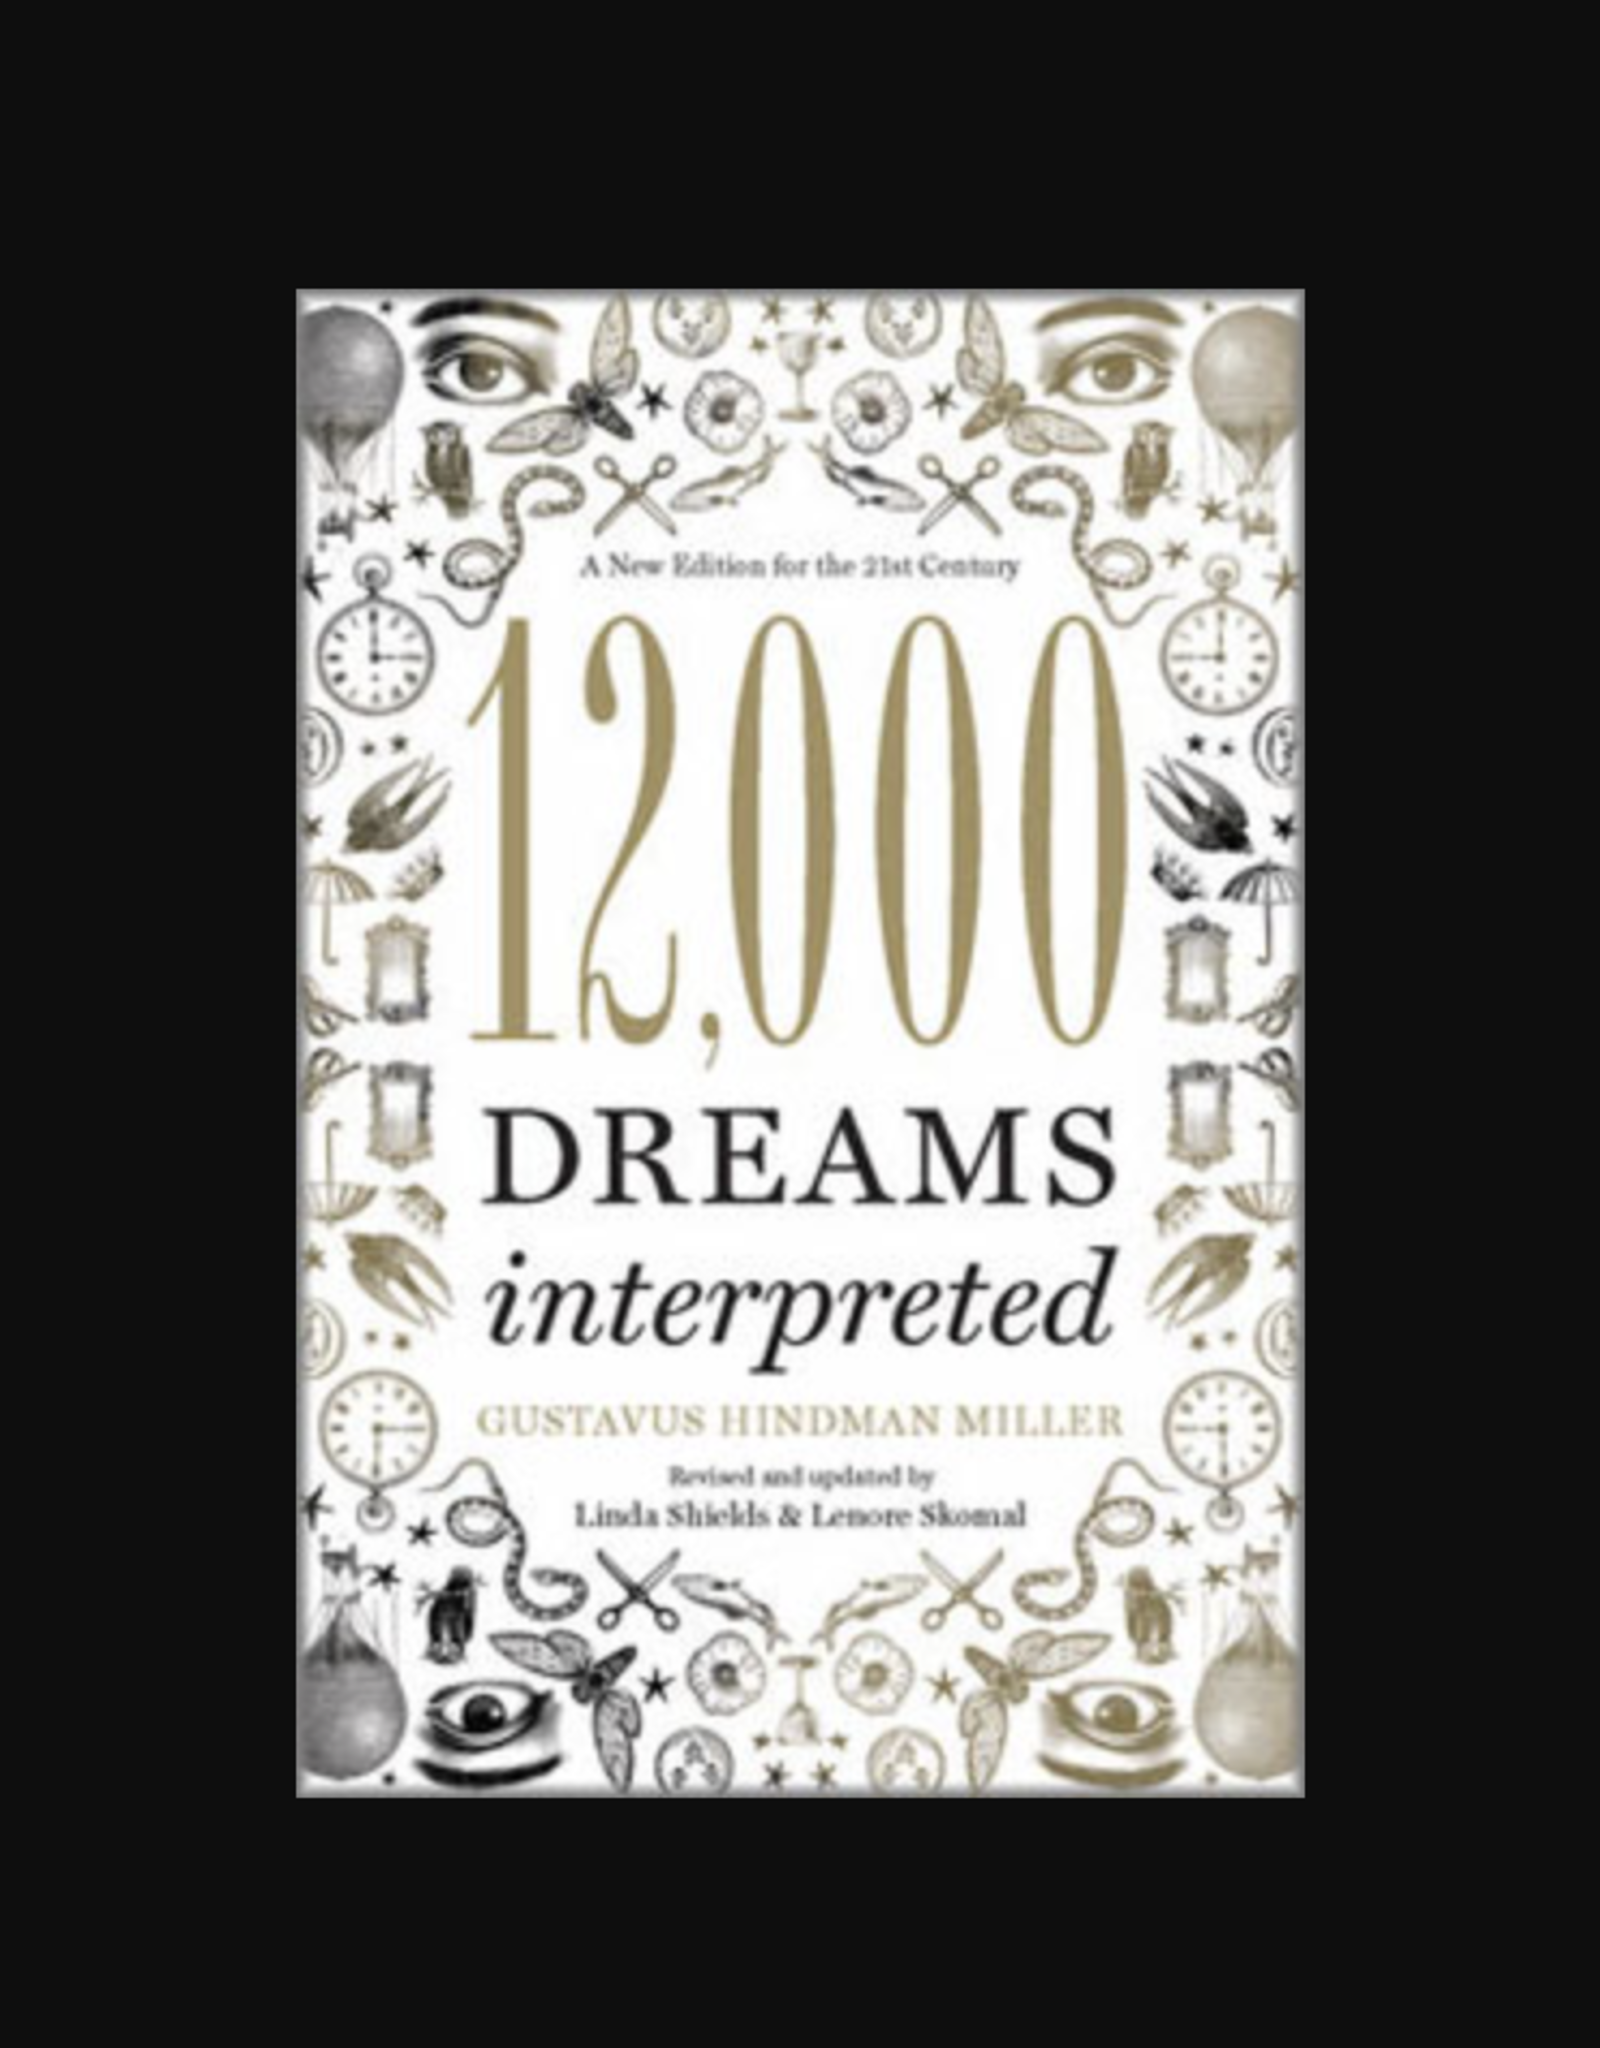 12,000 Dreams Interpreted - A New Edition for the 21st Century